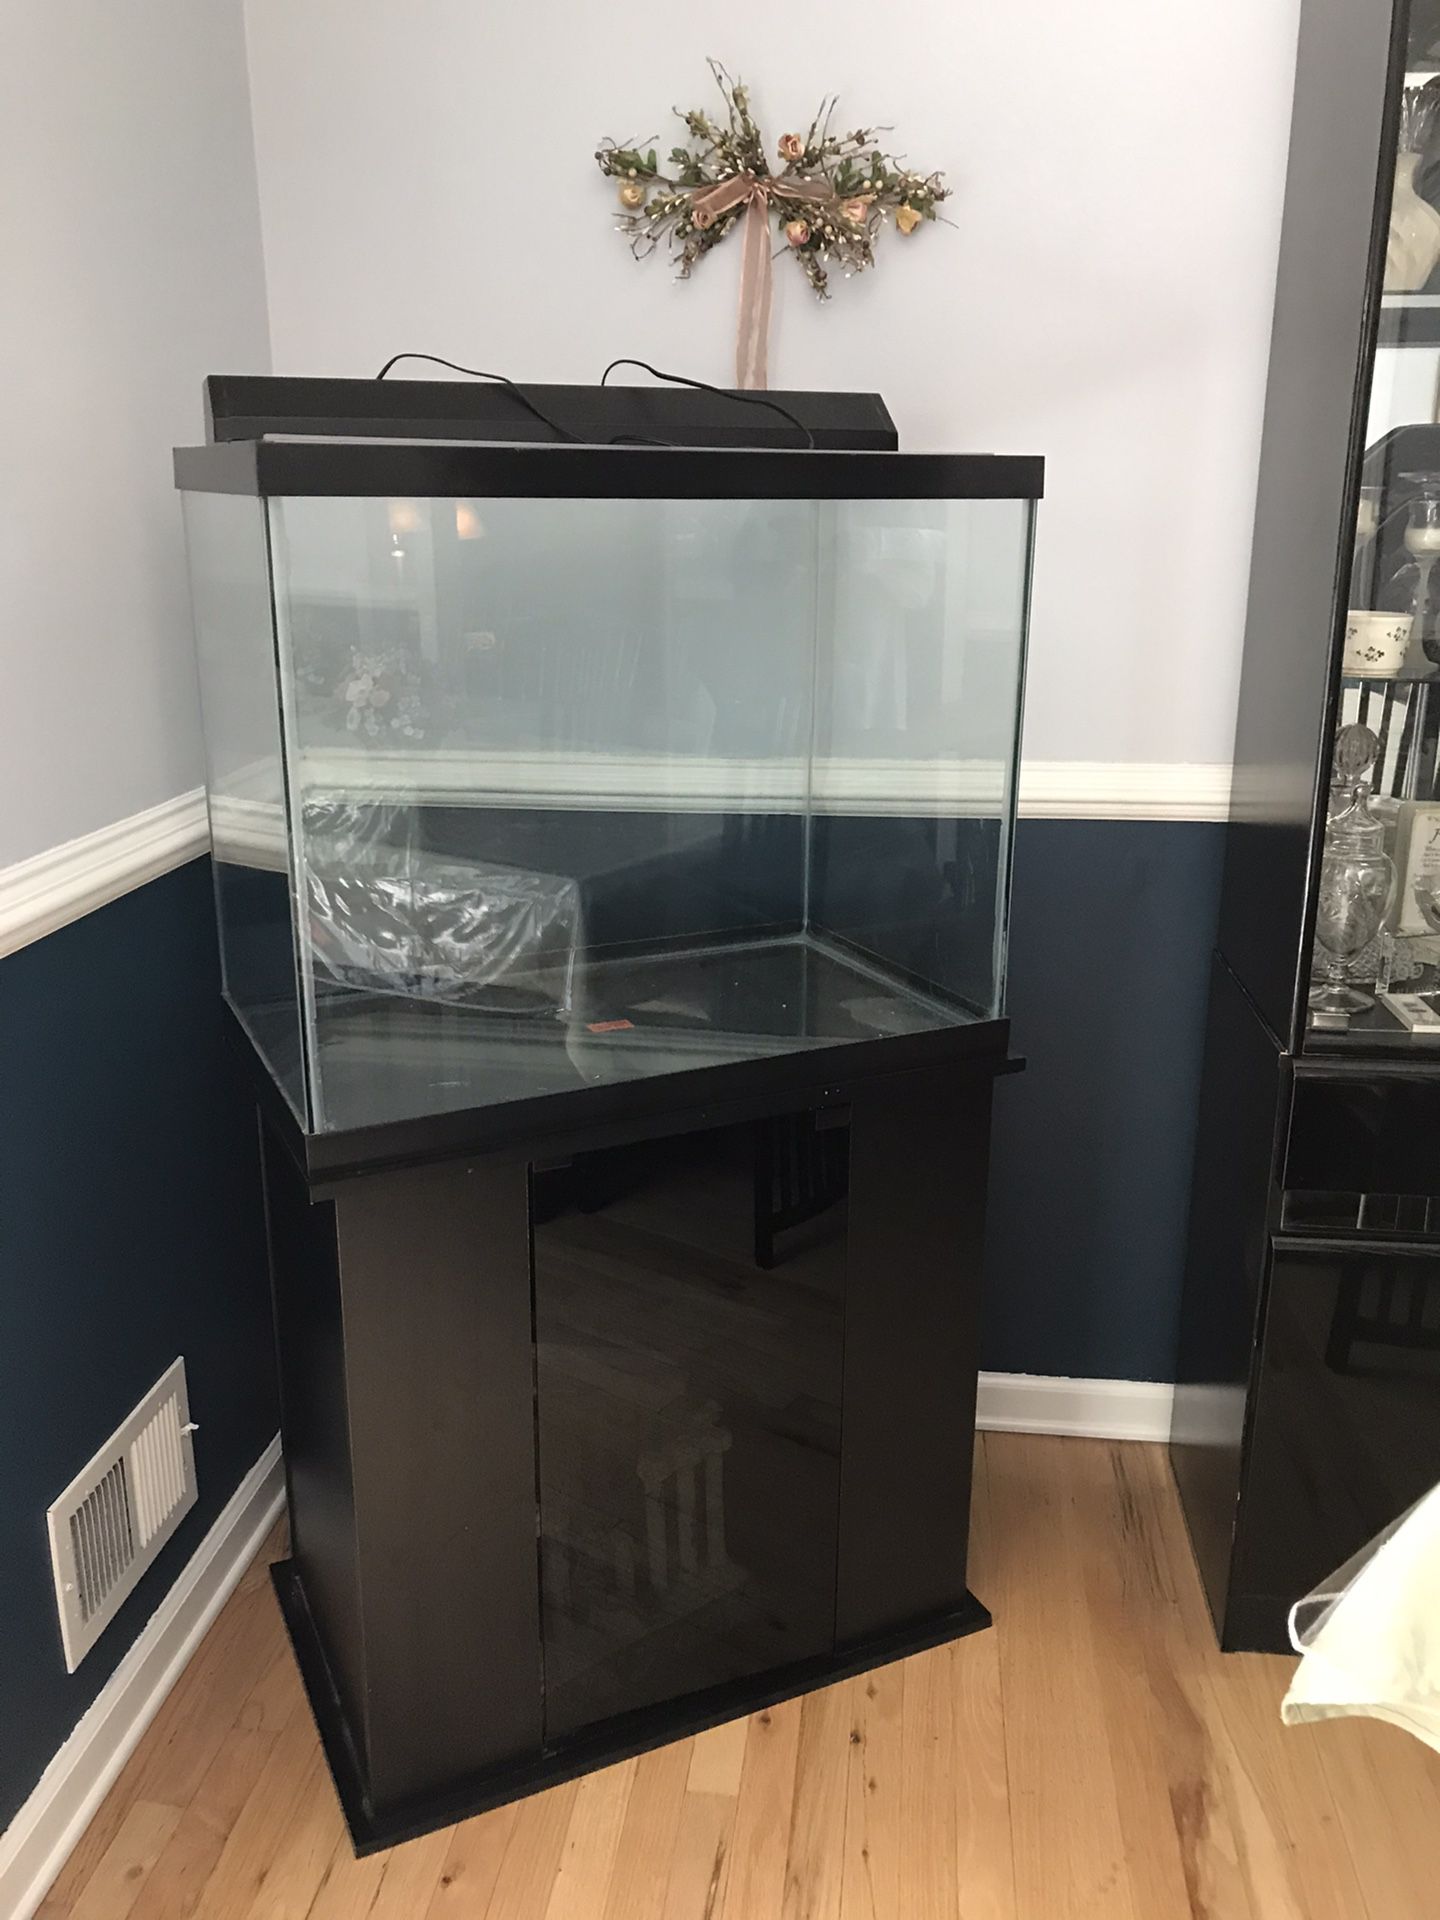 55 gallon fish tank with black stand